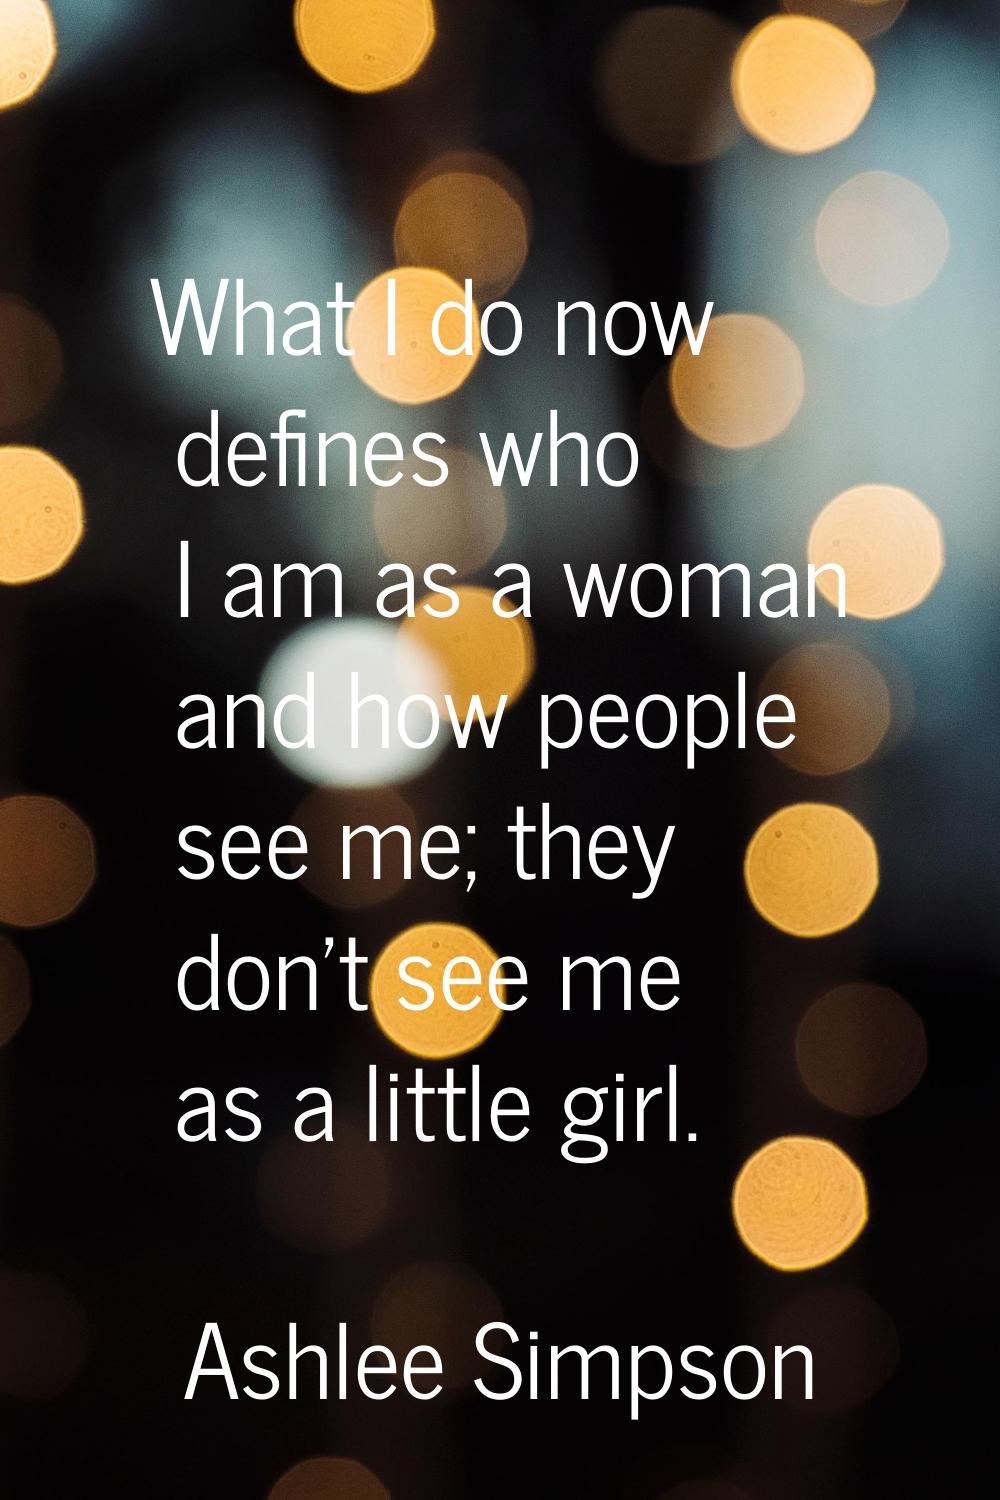 What I do now defines who I am as a woman and how people see me; they don't see me as a little girl